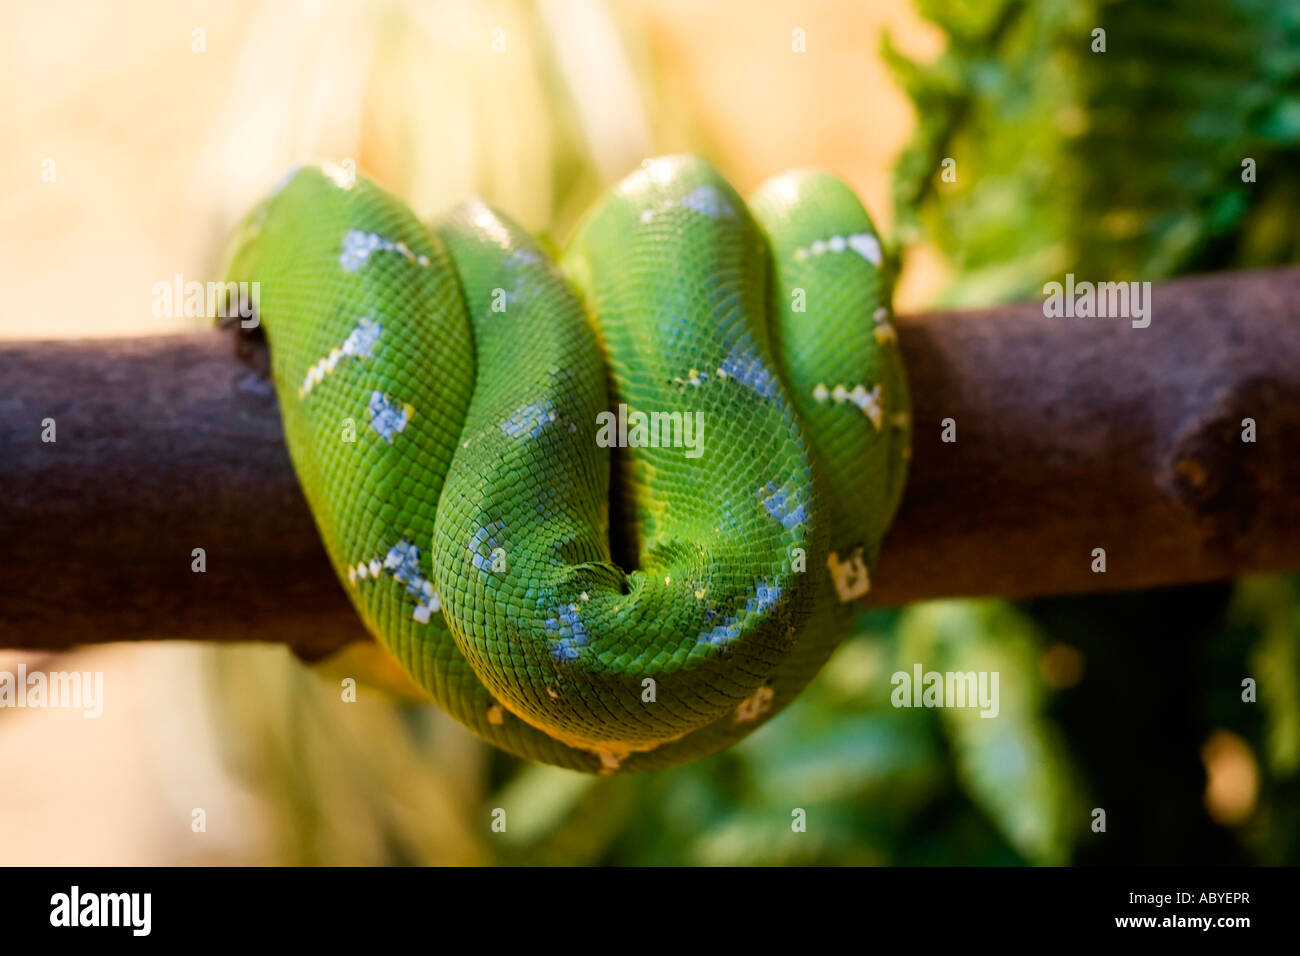 Green Tree Python Banque D'Images